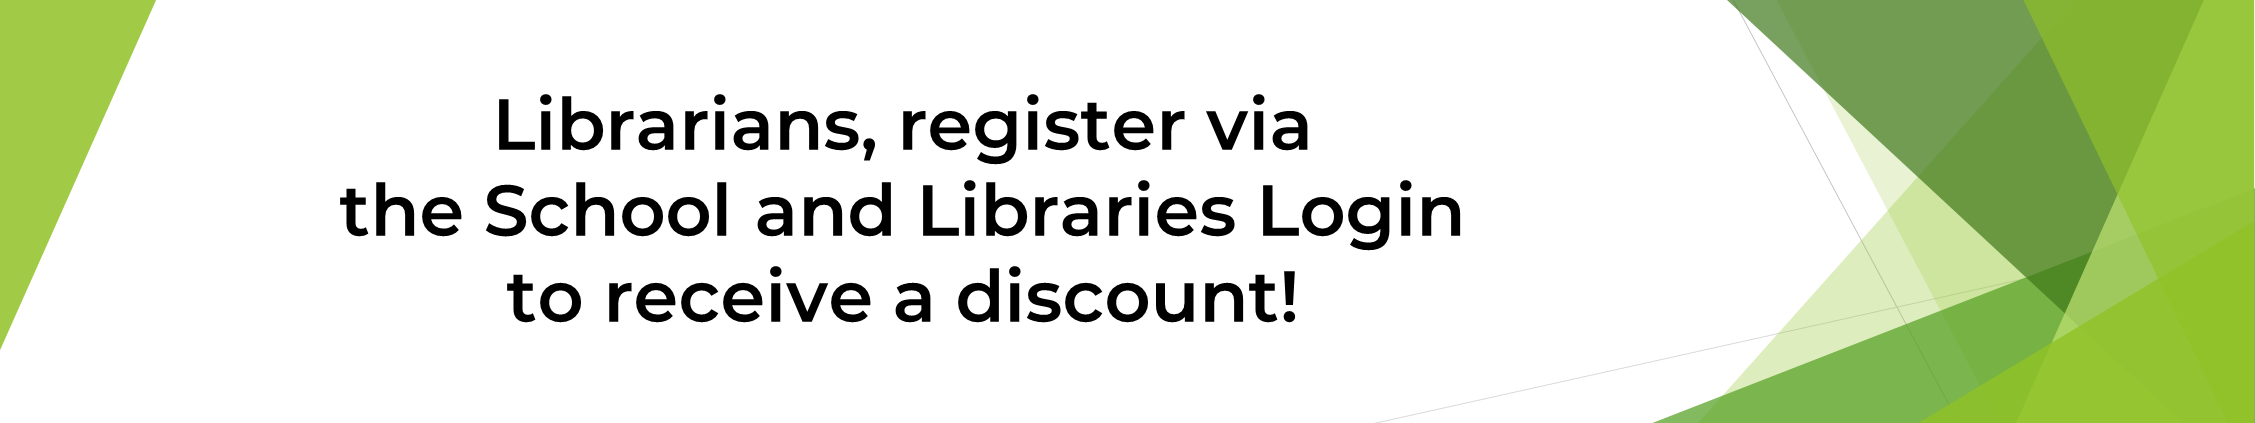 Librarian, register via the Librarian Portal to receive a discount!